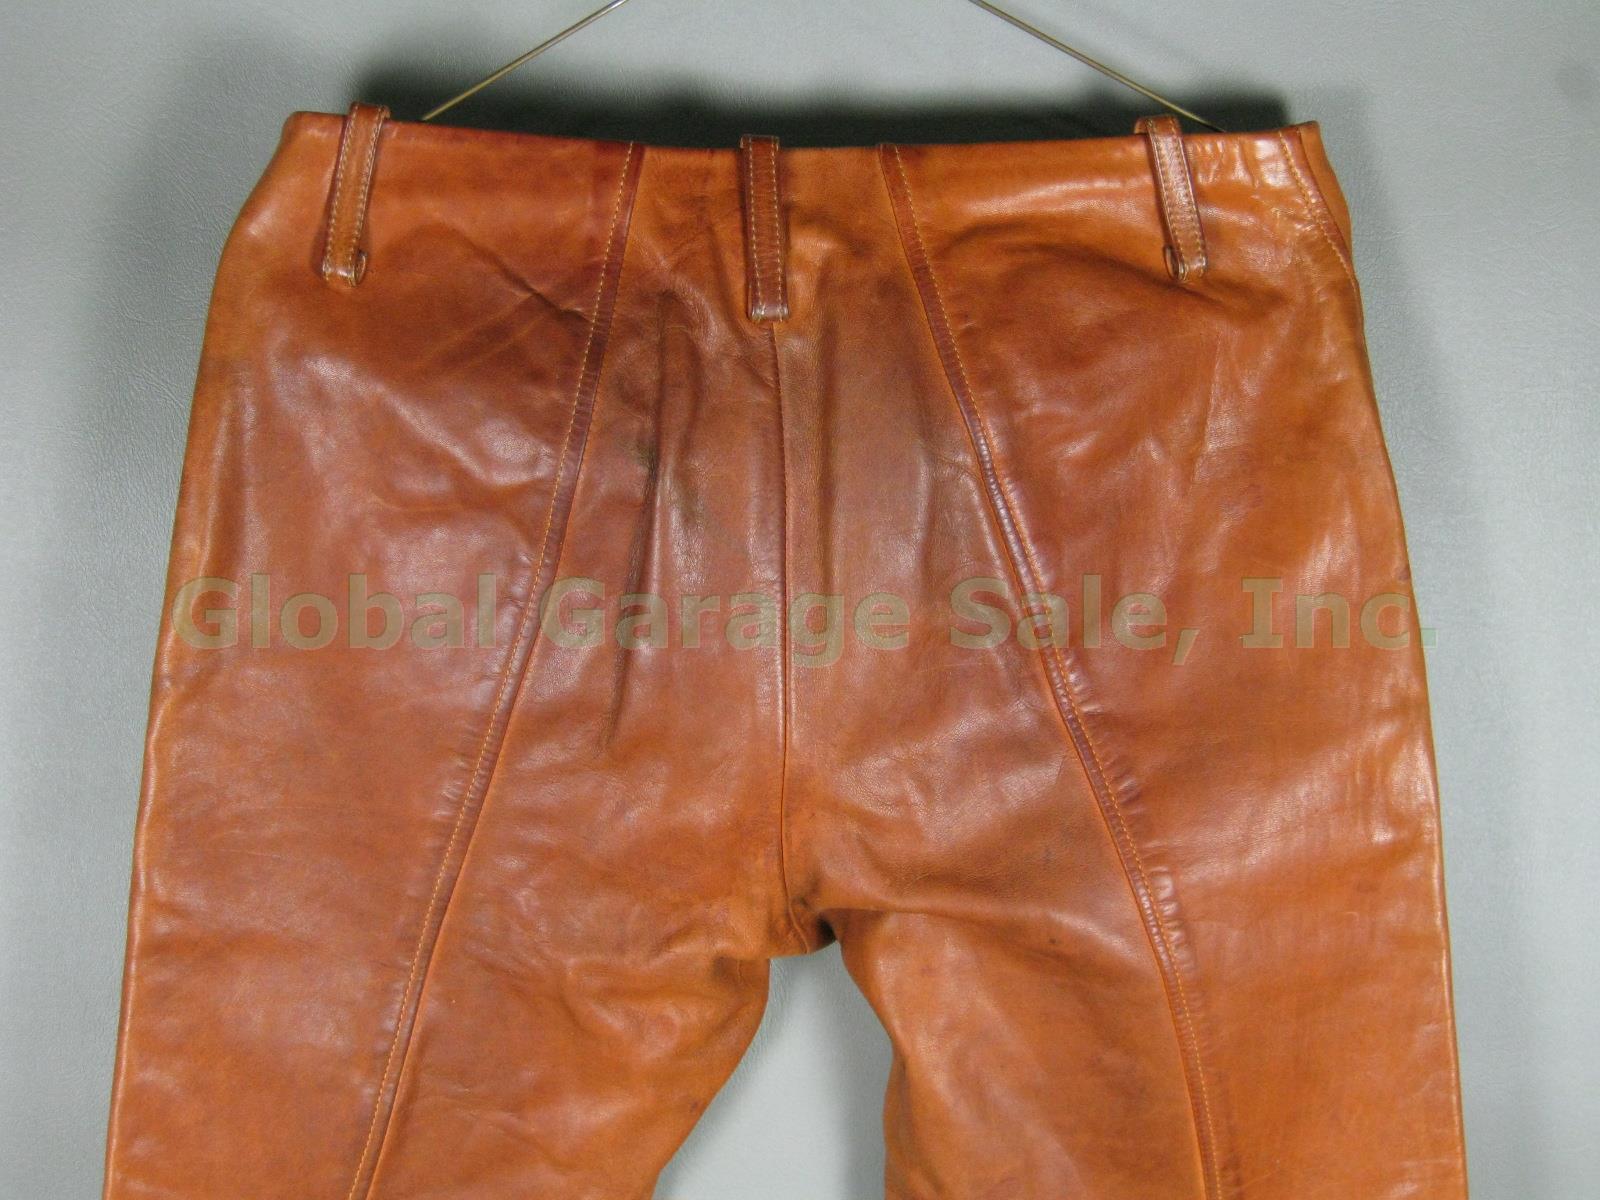 Vtg 1960s 1970s Vermont Made Leather Bell Bottom Hippie Rock Star Pants 31" x32" 5